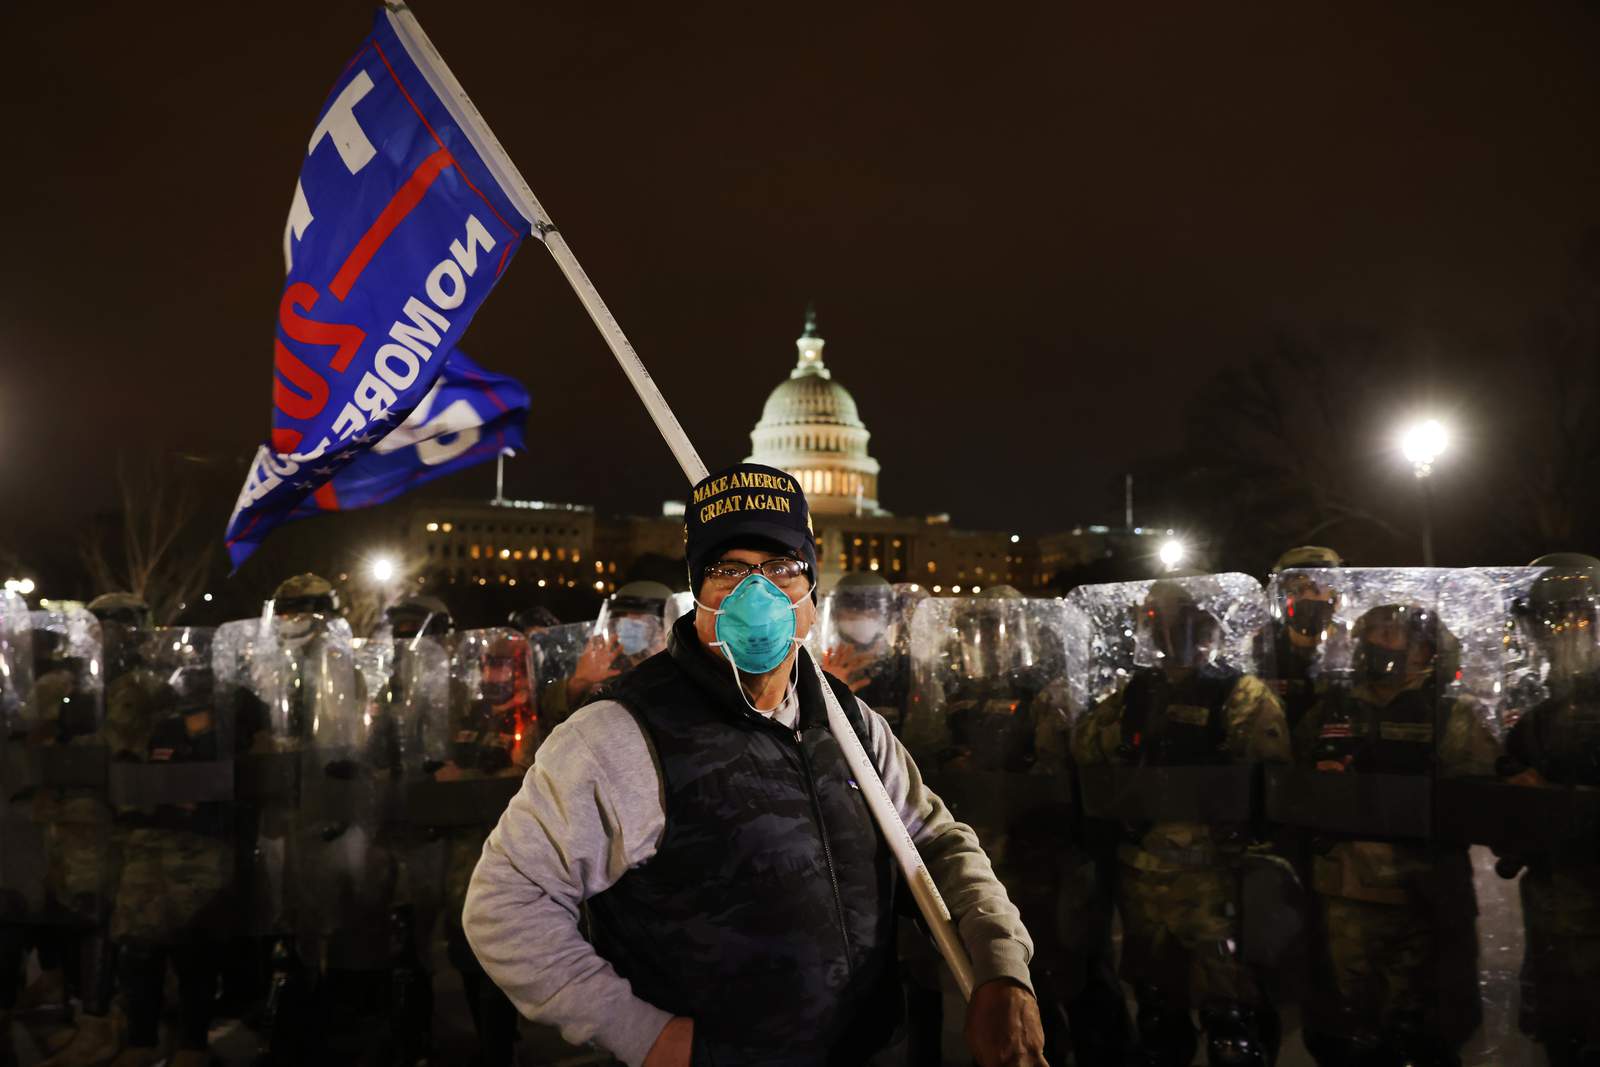 PHOTOS: Shocking images show Trump supporters invading U.S. Capitol, protesting into the night